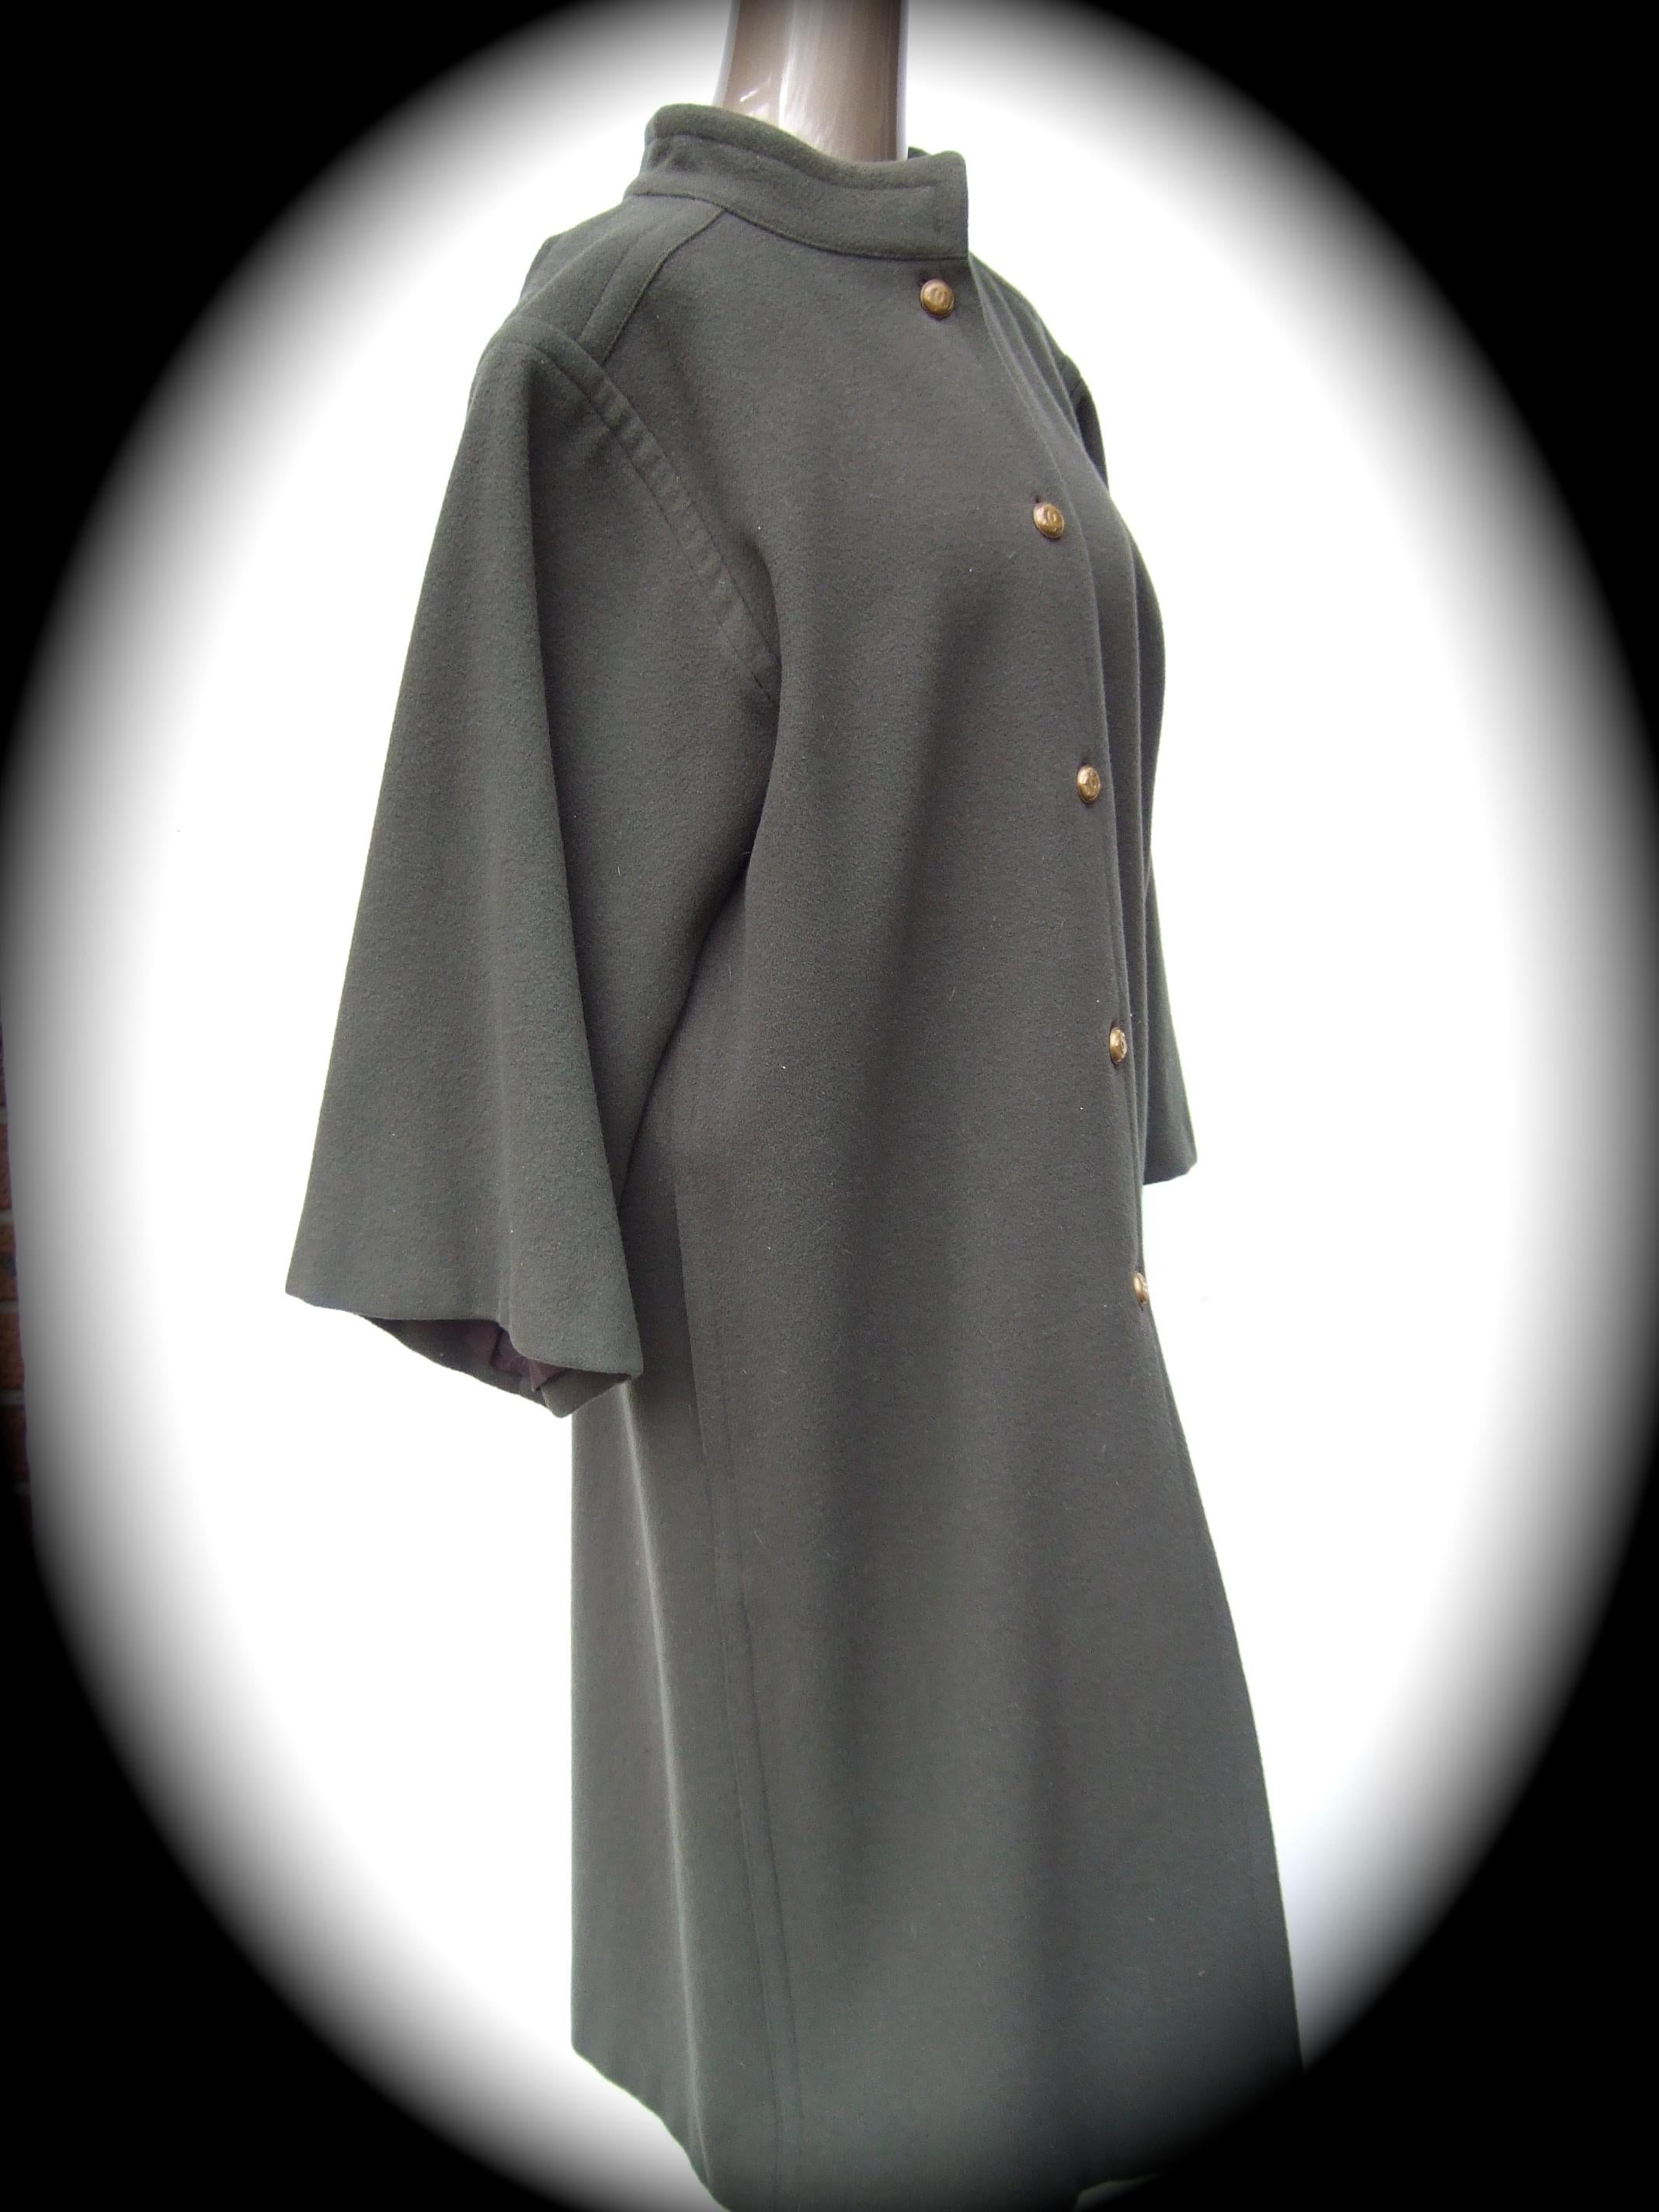 CHANEL Creations Muted Gray - Green Wool Coat with C.C. Buttons c 1980s For Sale 6